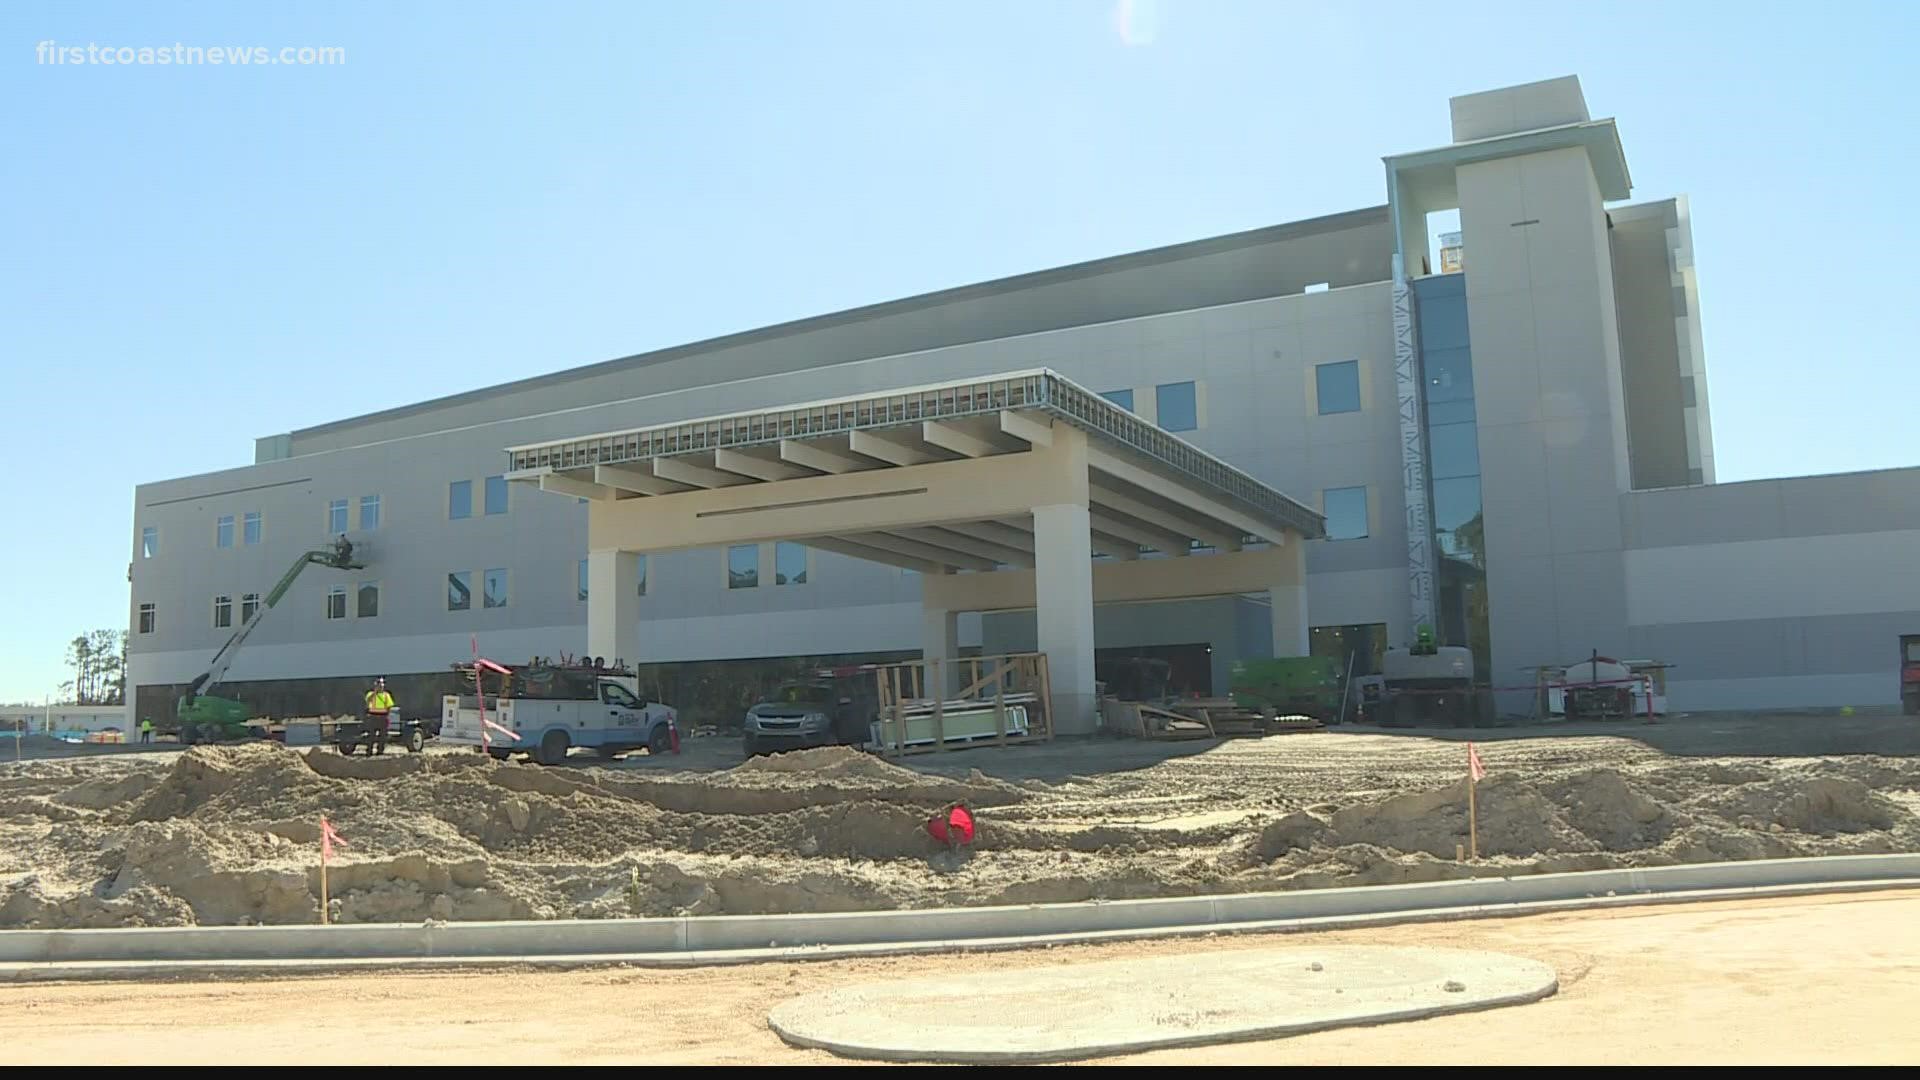 Apparently with a population boom, there comes a hospital boom. That's what's happening in St. Johns County.